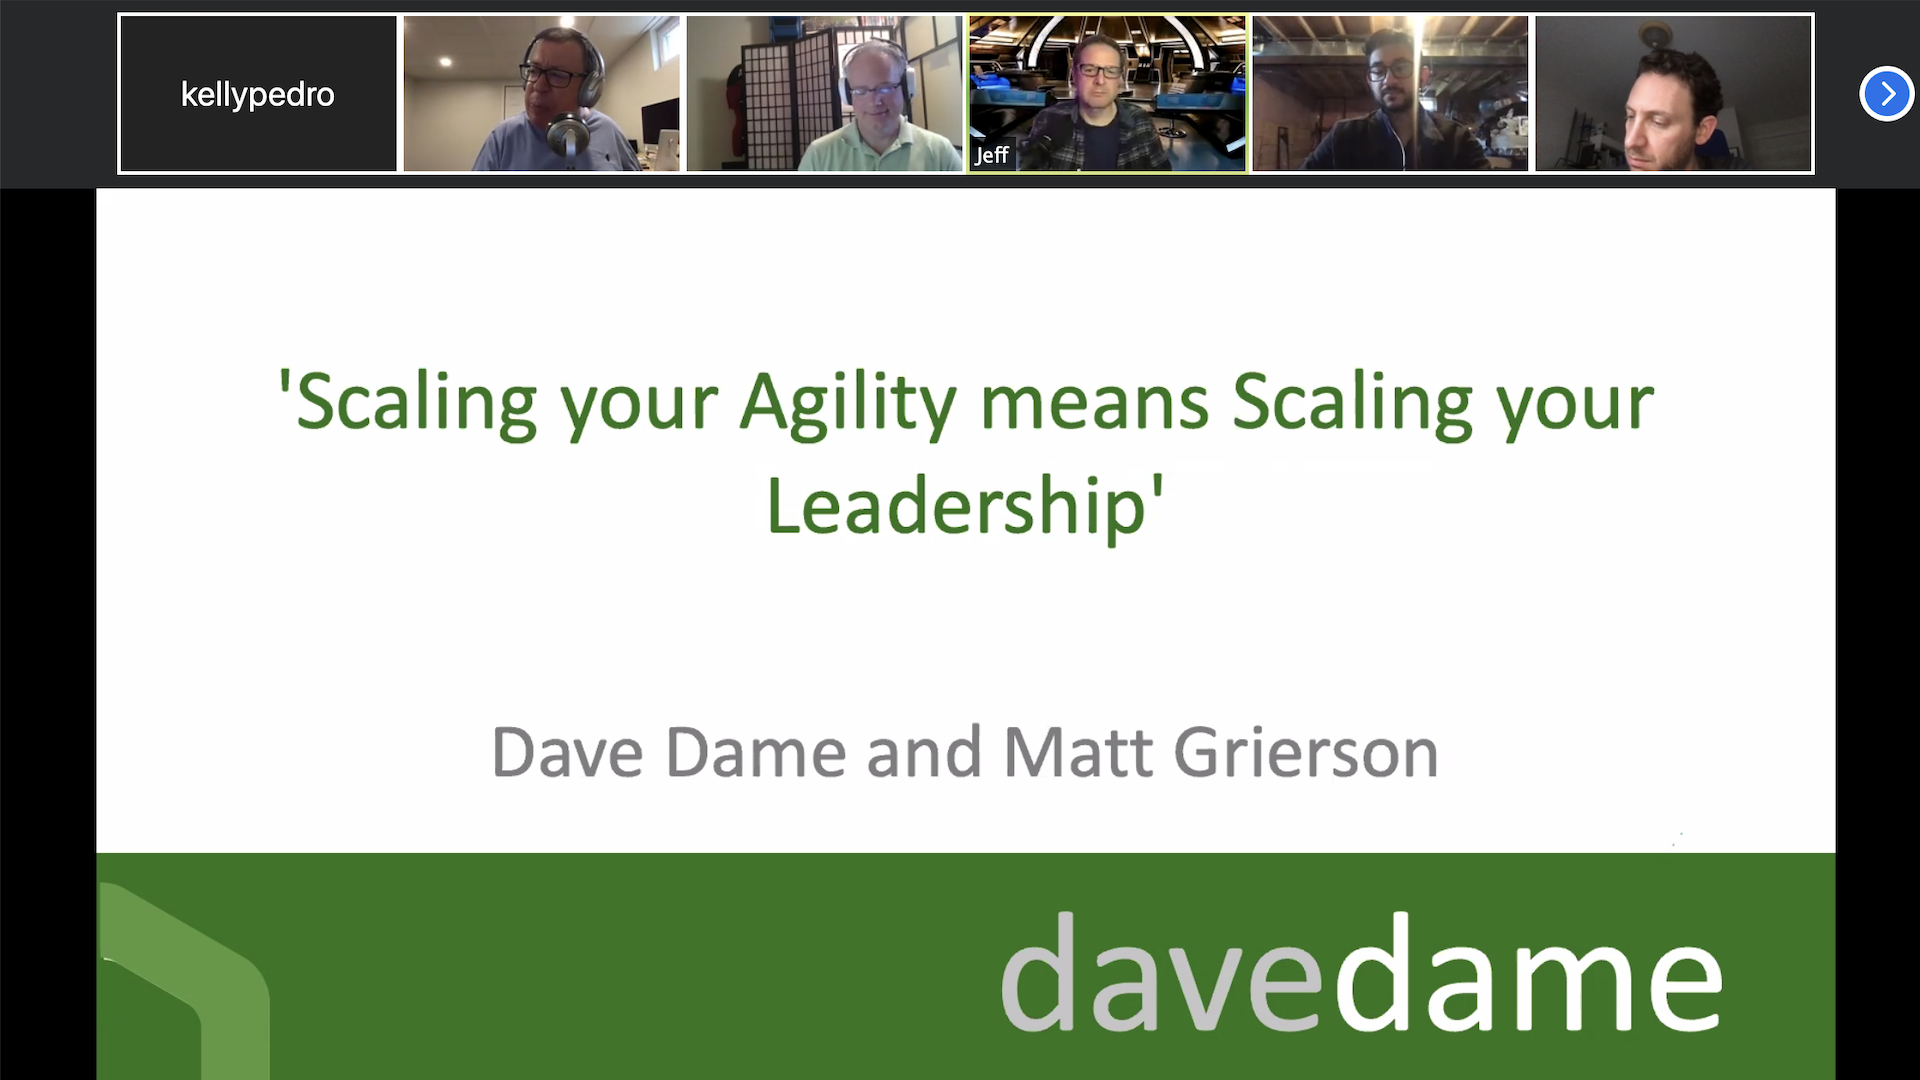 Dave Dame and Matt Grierson's 'Scaling your Agility means Scaling your Leadership'